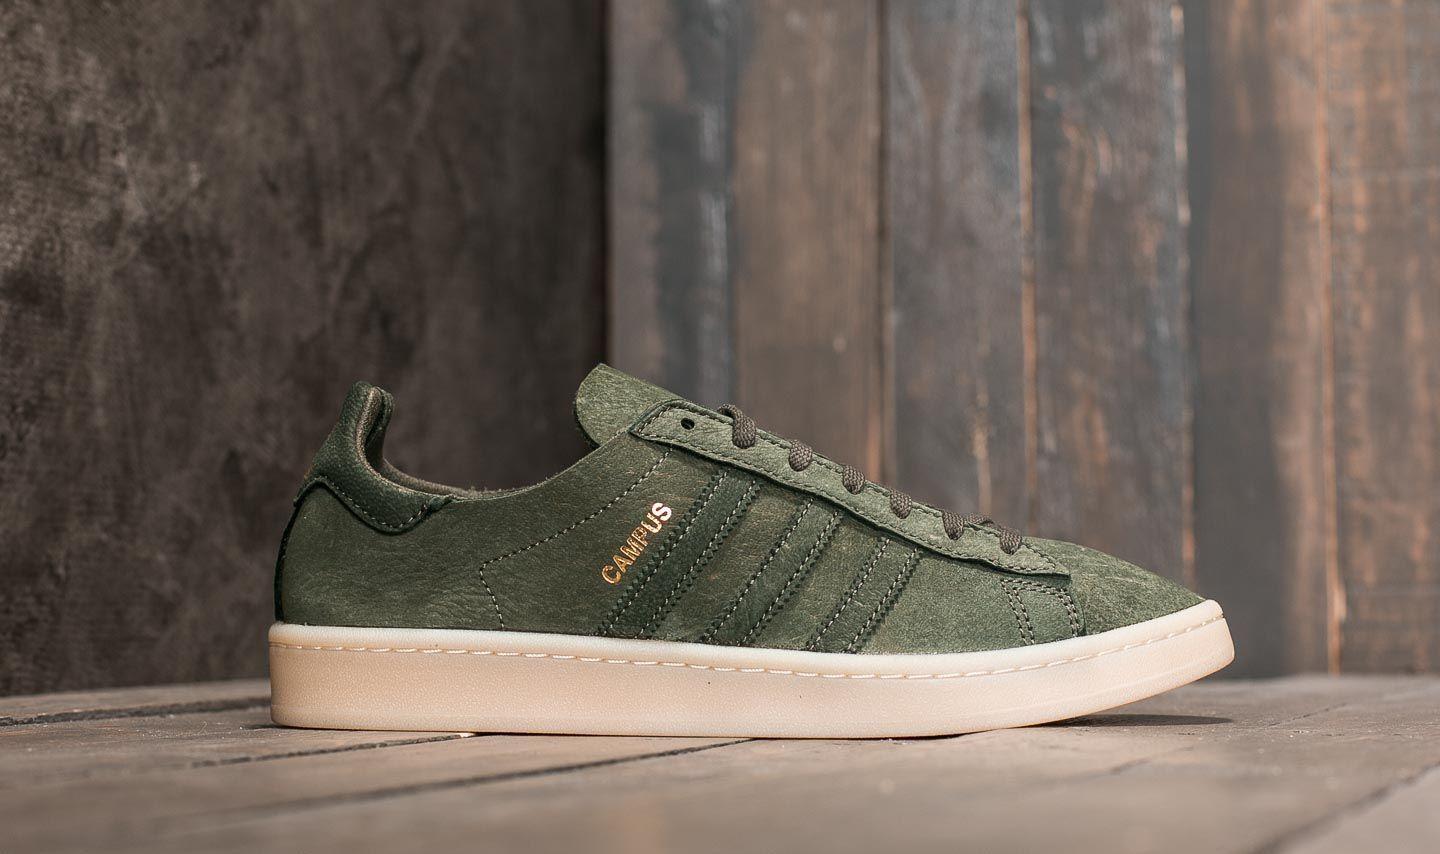 adidas campus crafted - OFF70% - pect.se!